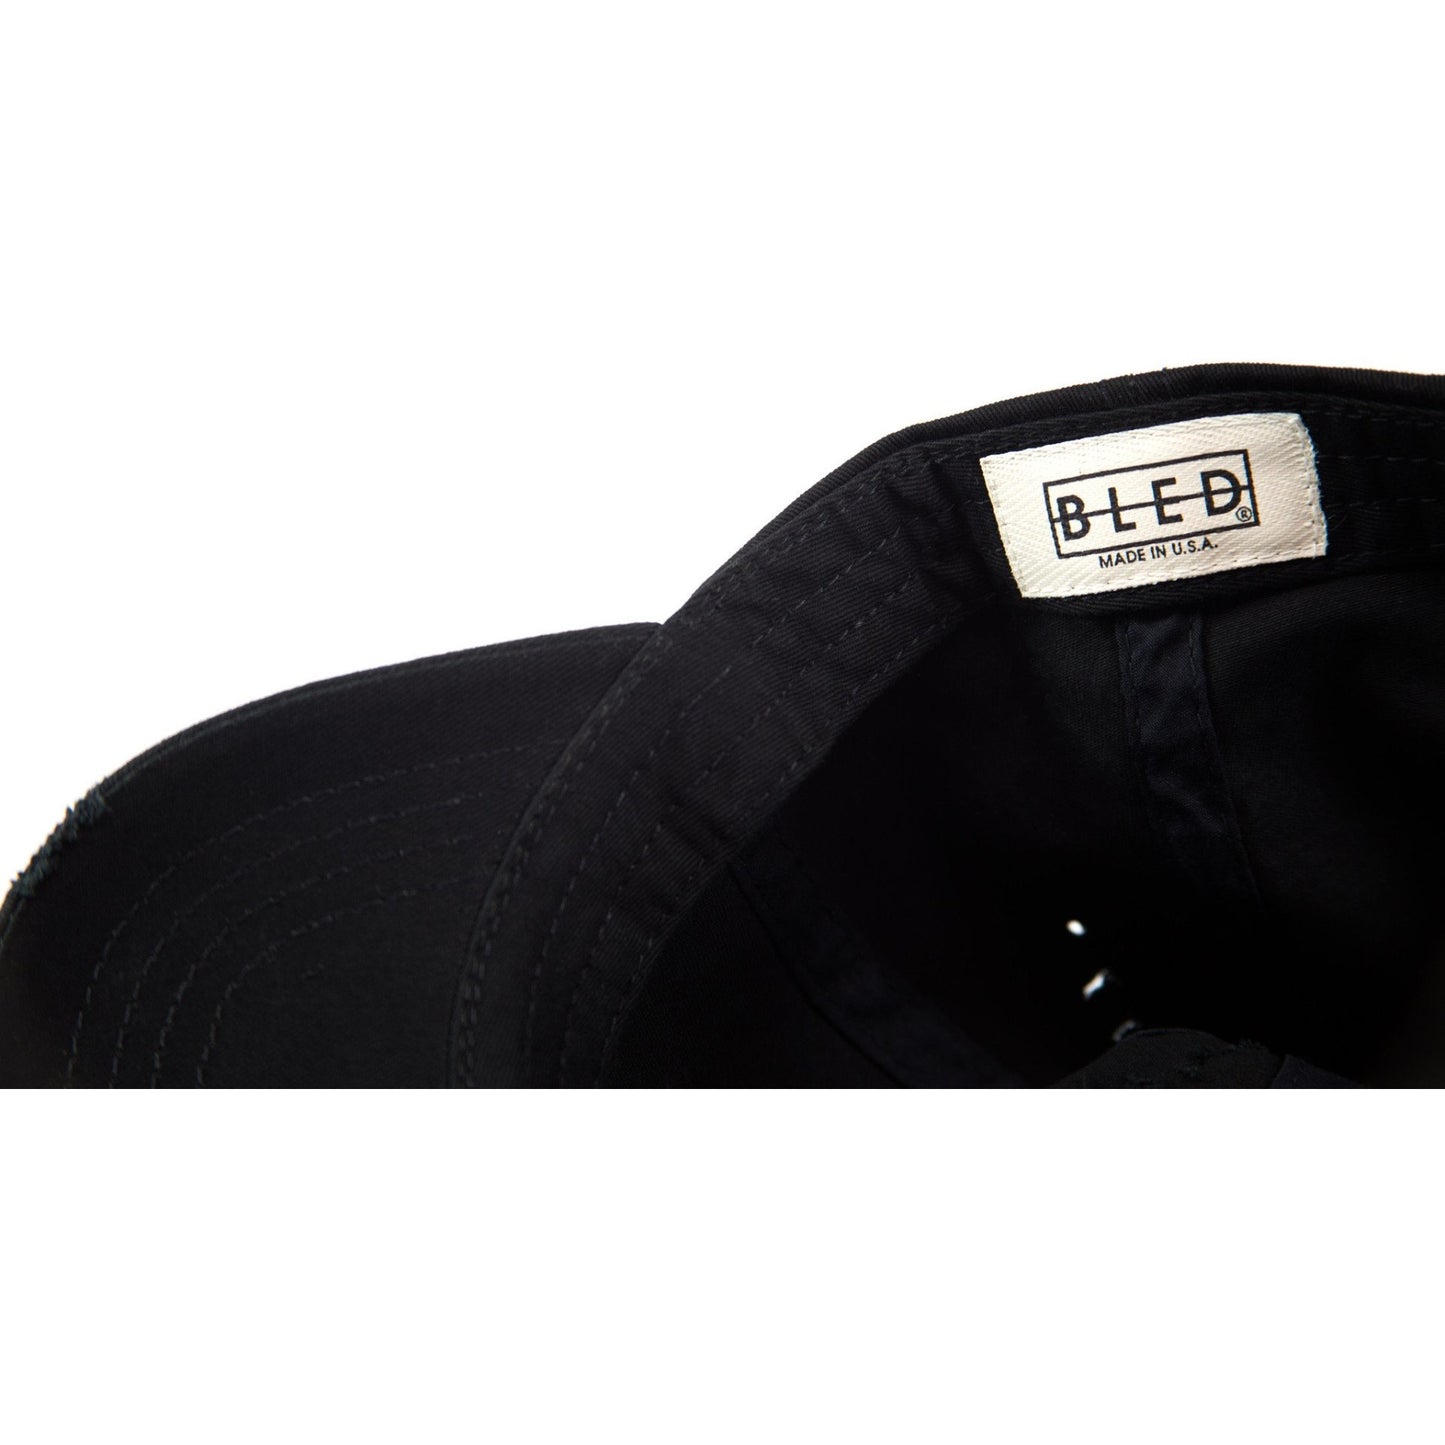 6-panel unconstructed 100% Cotton black distressed dad hat featuring evil eye embroidery on the front and Bled logo embroidered on the back. Third Eye Hat